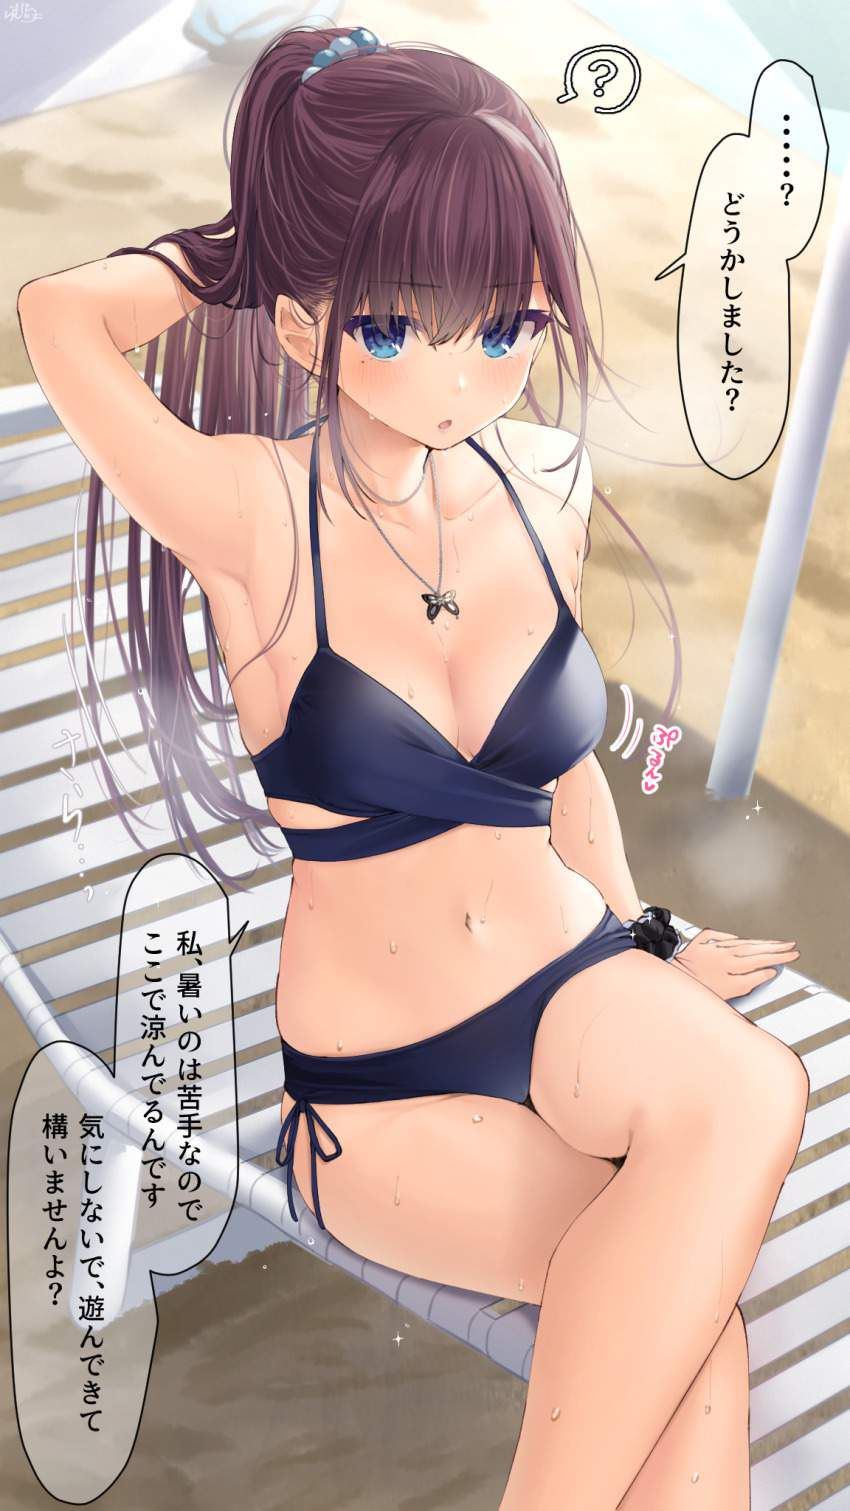 【Ad-sysing】"What are you looking at?" Secondary erotic image of feeling like 29